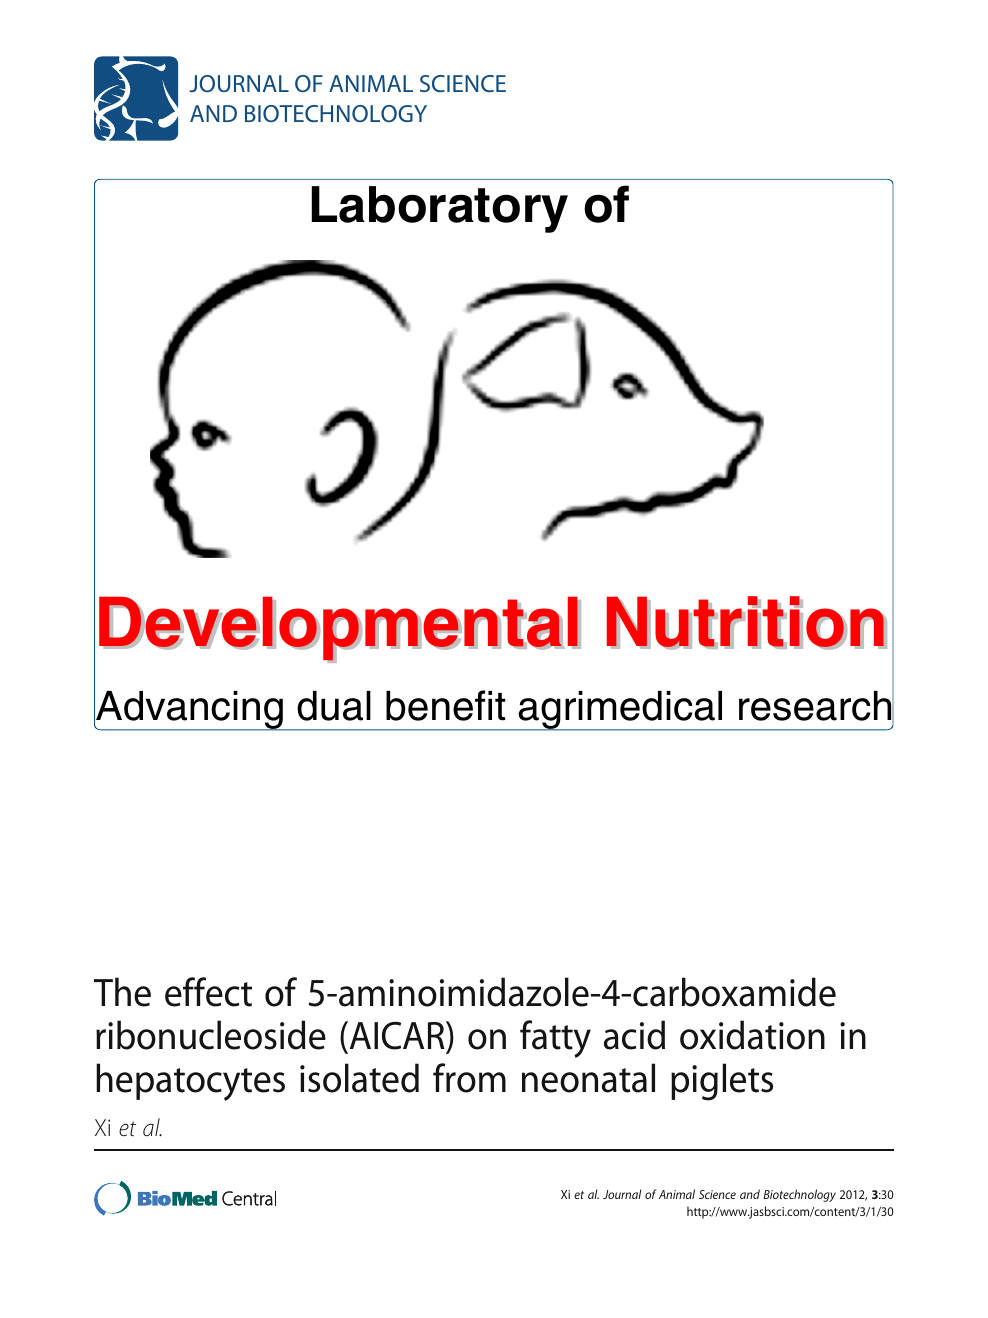 The Effect Of 5 Aminoimidazole 4 Carboxamide Ribonucleoside Aicar On Fatty Acid Oxidation In Hepatocytes Isolated From Neonatal Piglets Topic Of Research Paper In Veterinary Science Download Scholarly Article Pdf And Read For Free